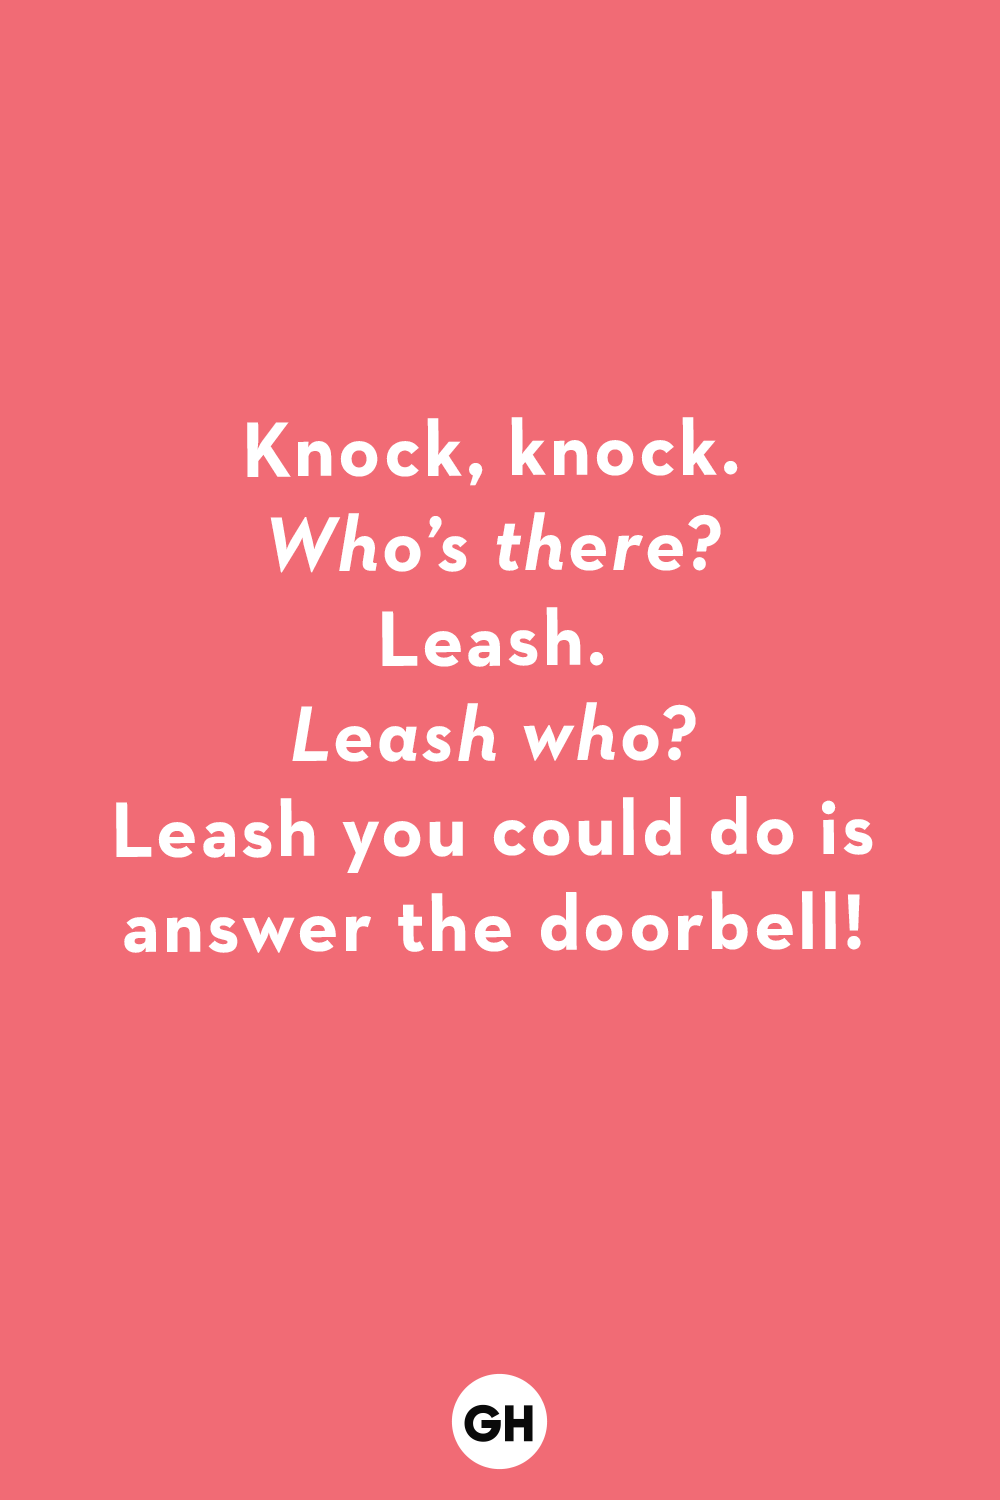 70 Hilarious Knock Knock Jokes for Kids of All Ages 2023